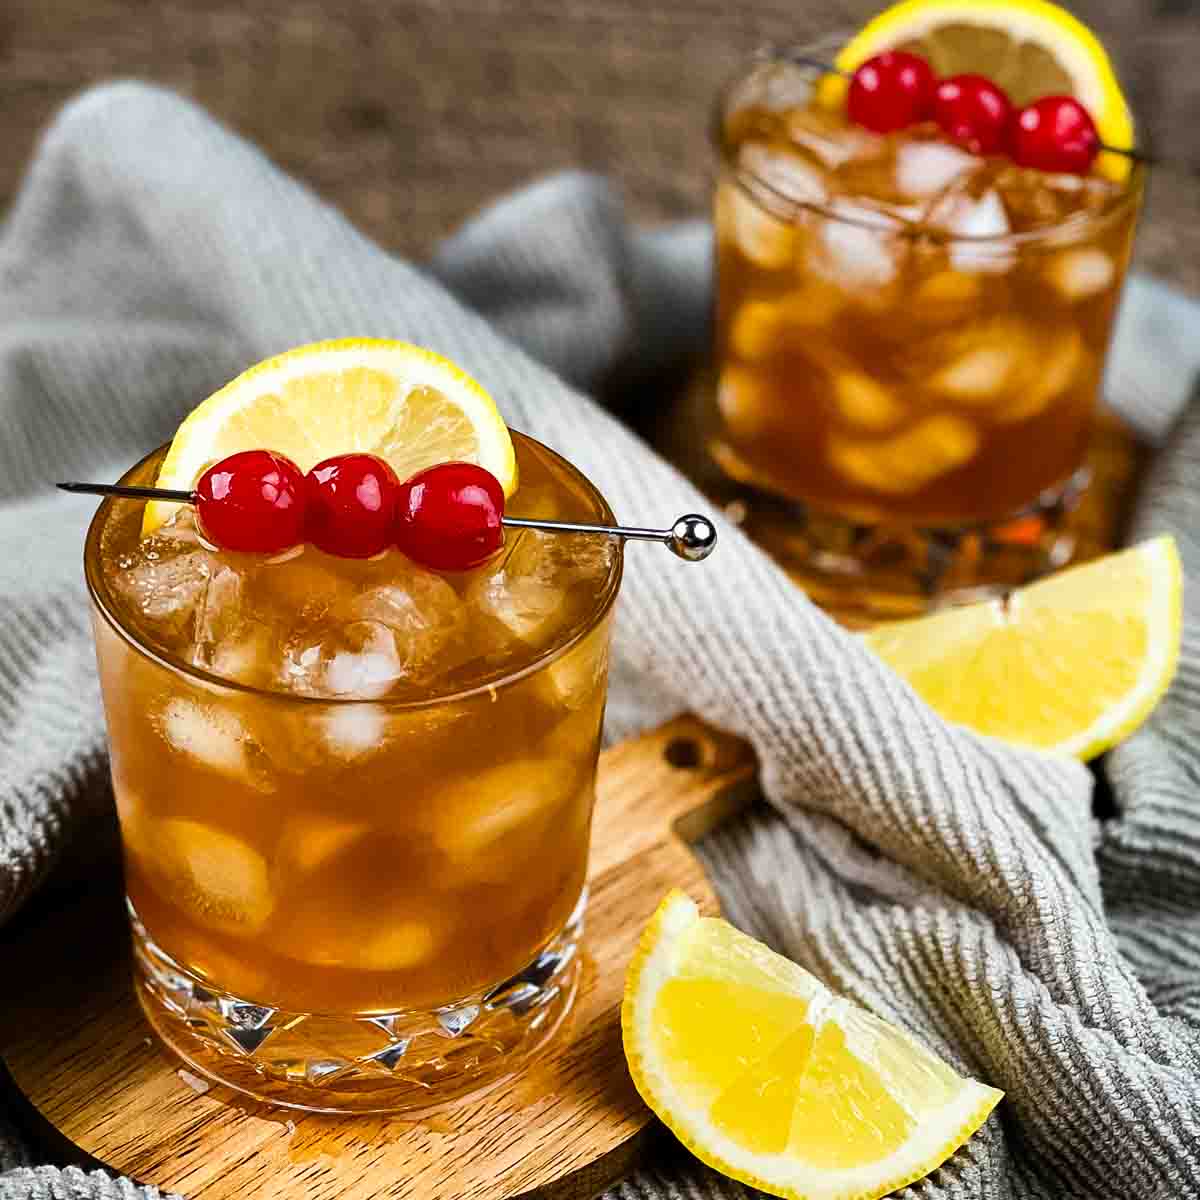 Two old-fashioned glasses with the rum sour cocktail, garnished with cherries and lemons.